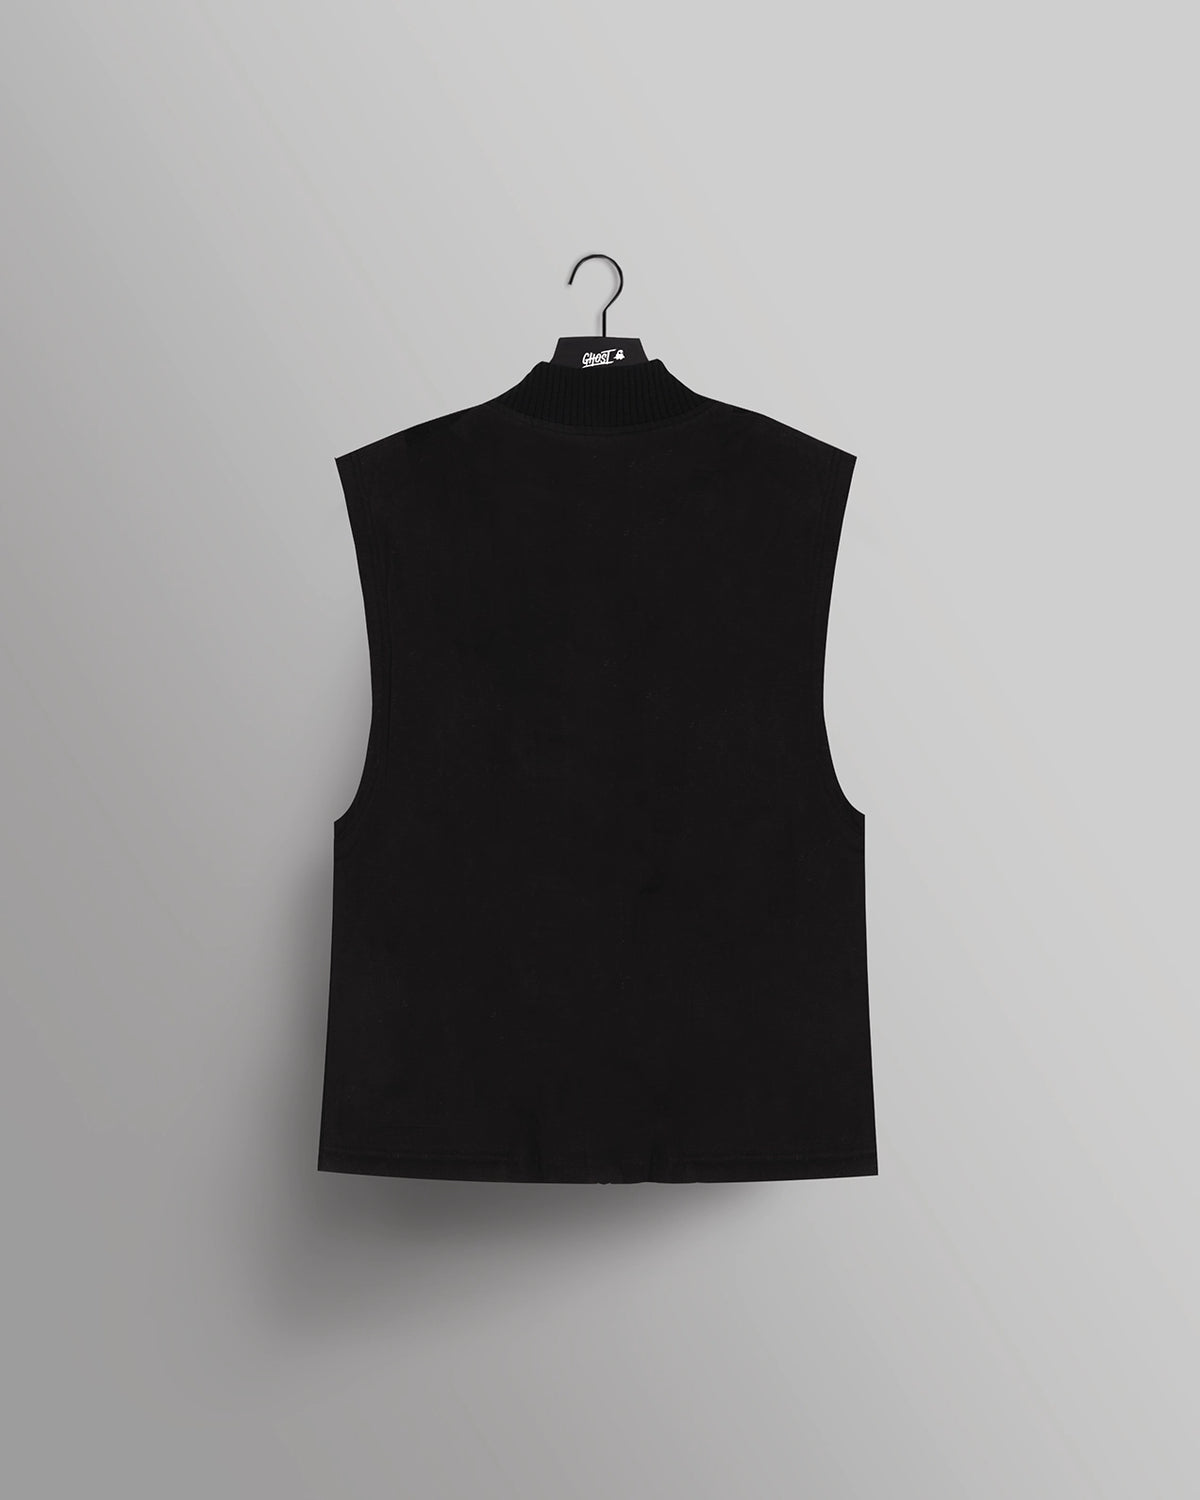 GHOST® SHERPA LINED VEST | BLACK - GHOST LIFESTYLE